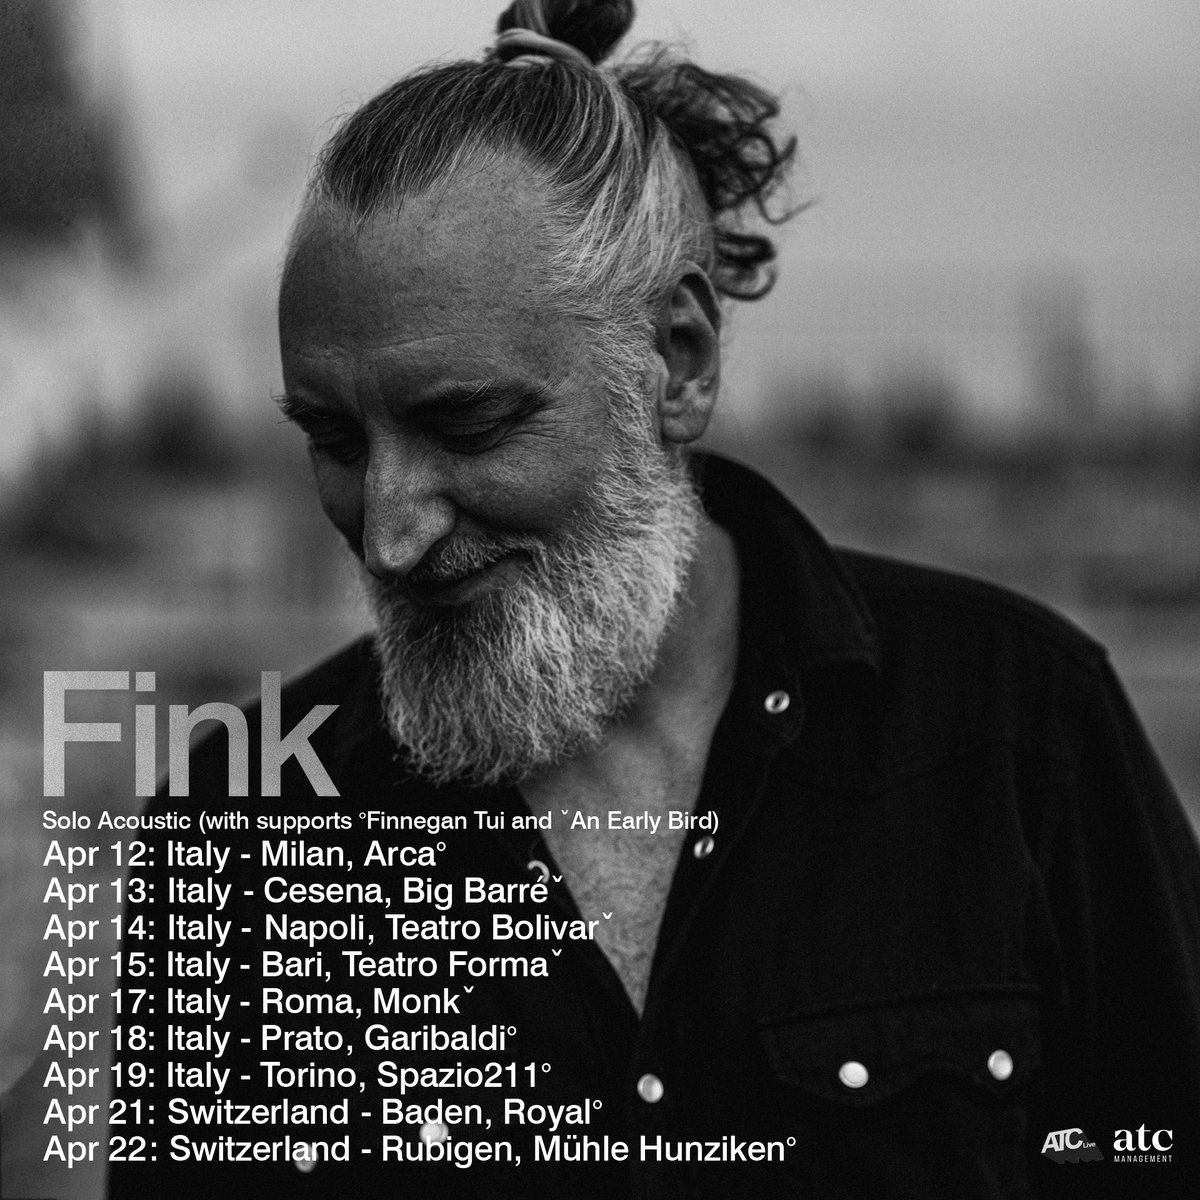 Can’t wait to share the stage with @FinneganTui on this Italy and Swiss run around - a daring artist who is carving his own path with riffs, energy and a smile on his face - tickets available: finkworld.co.uk/#tour